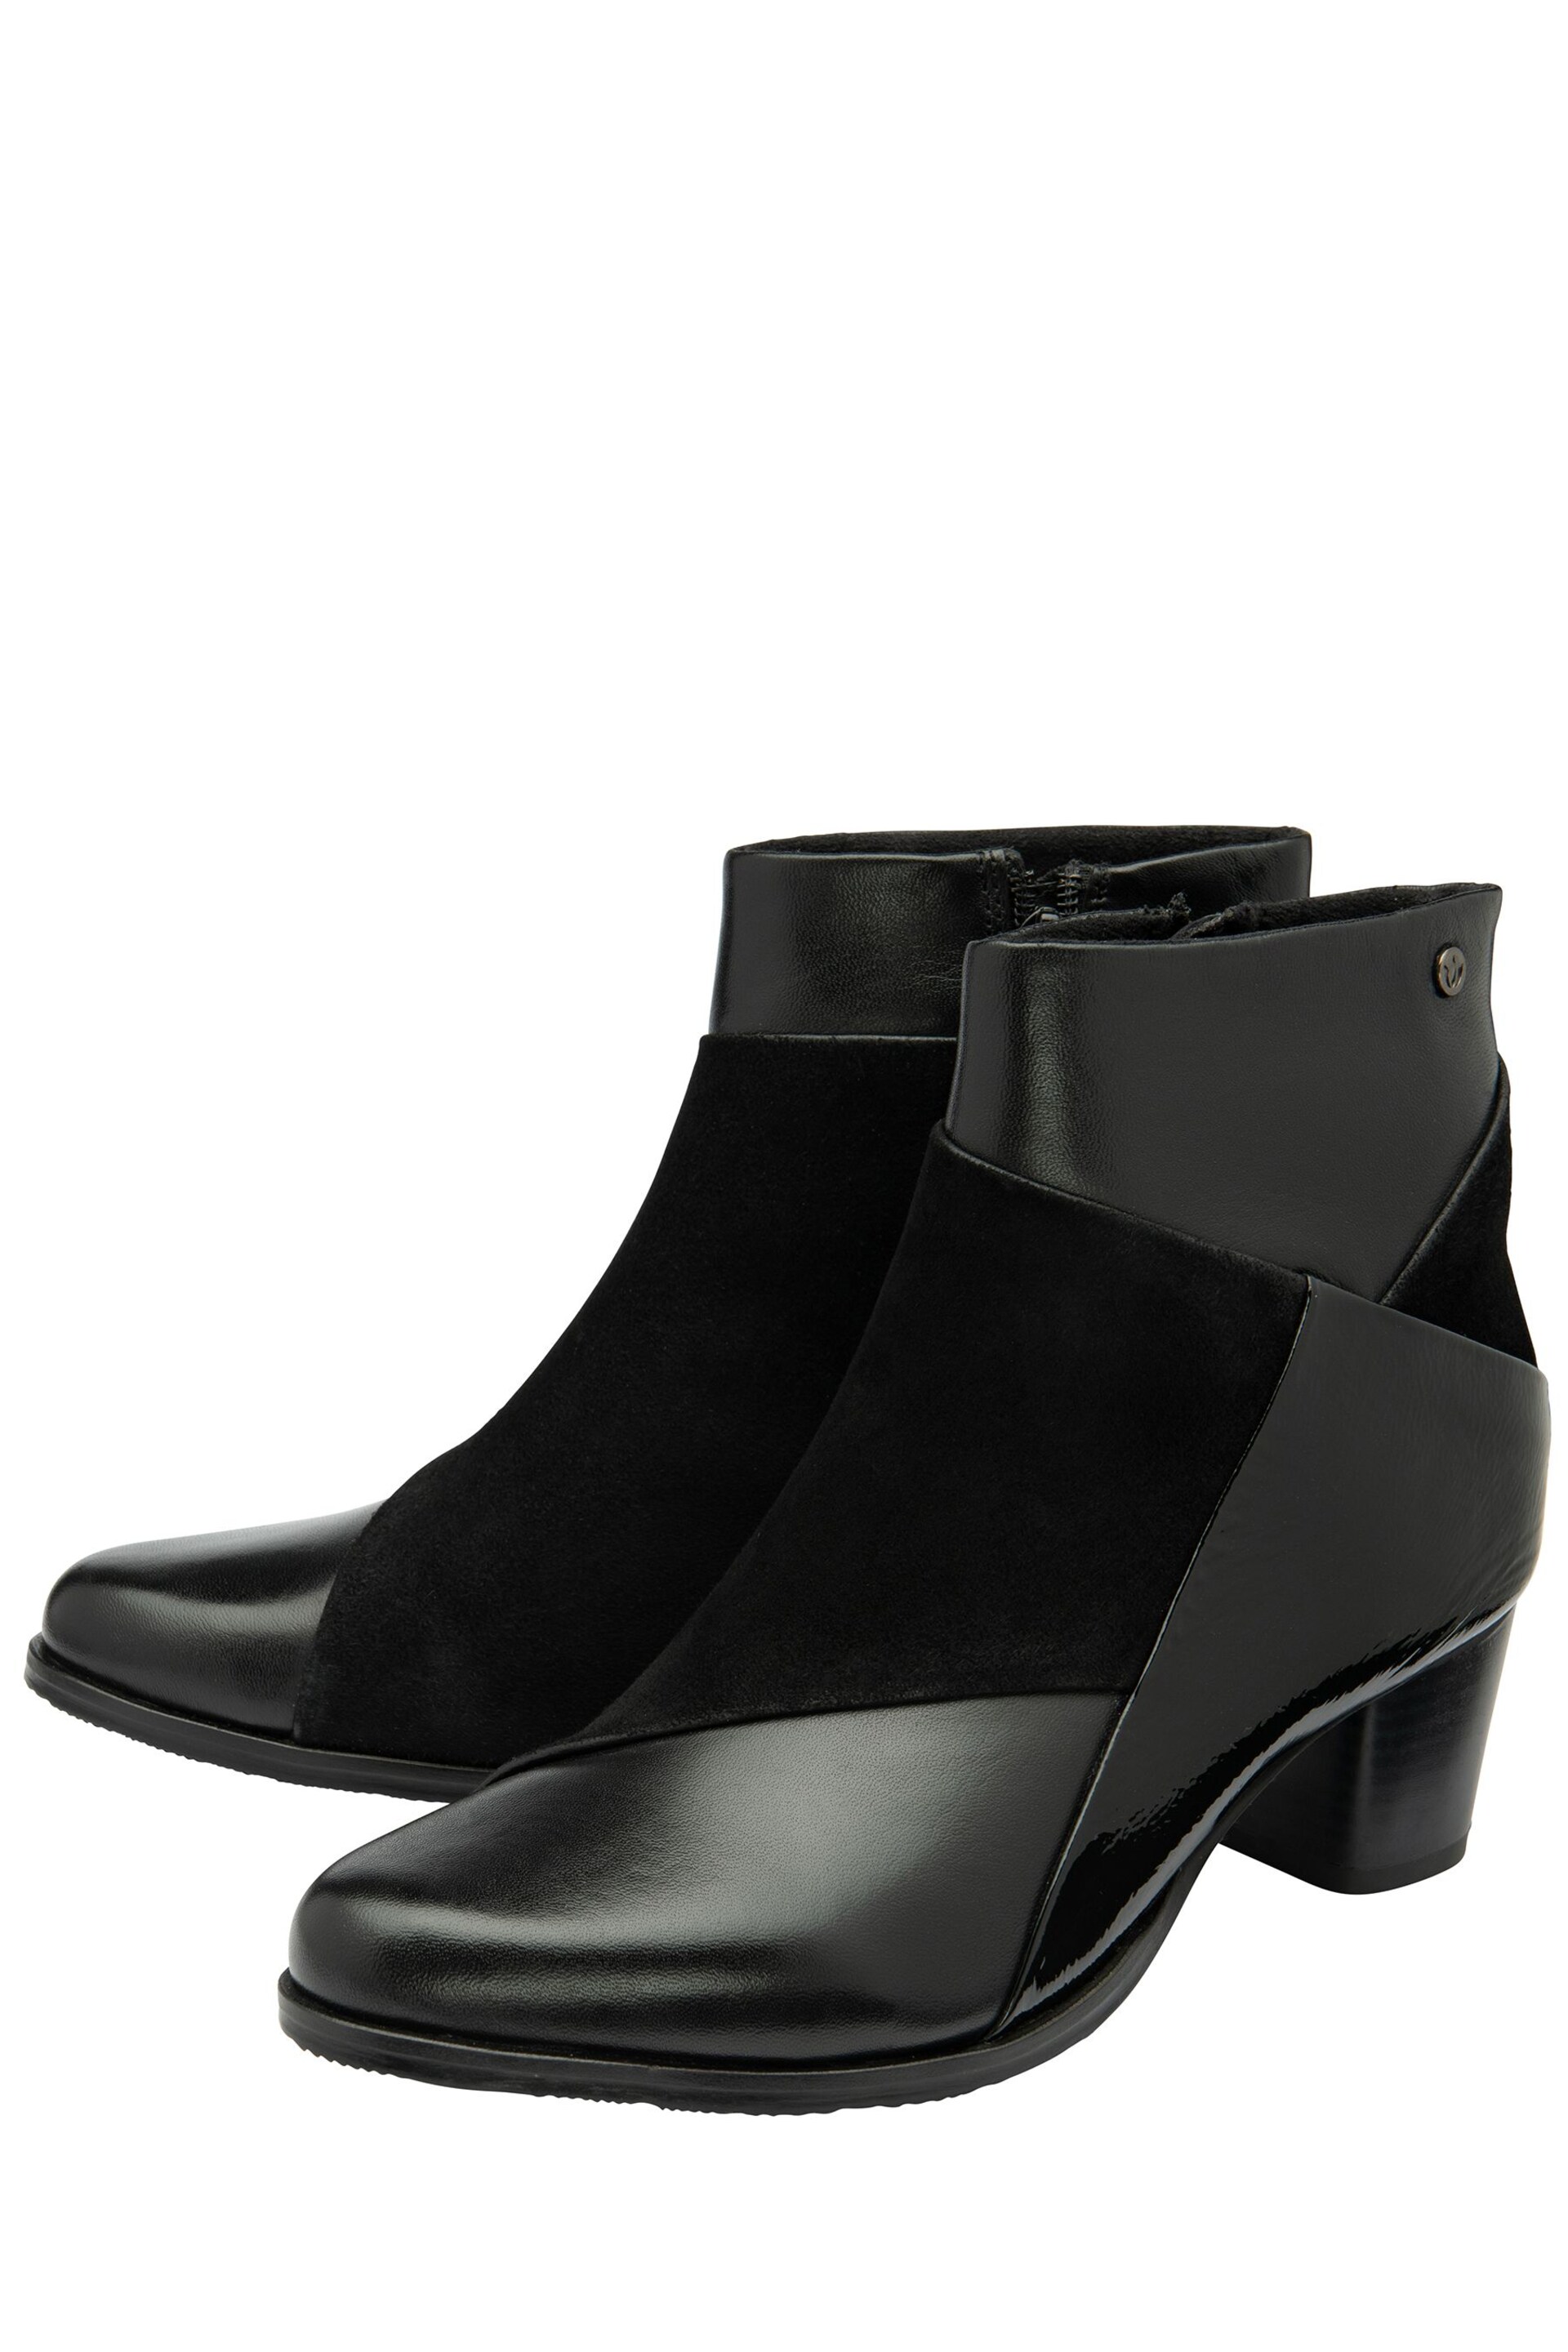 Lotus Jet Black Lace-Up Ankle Boots - Image 2 of 4